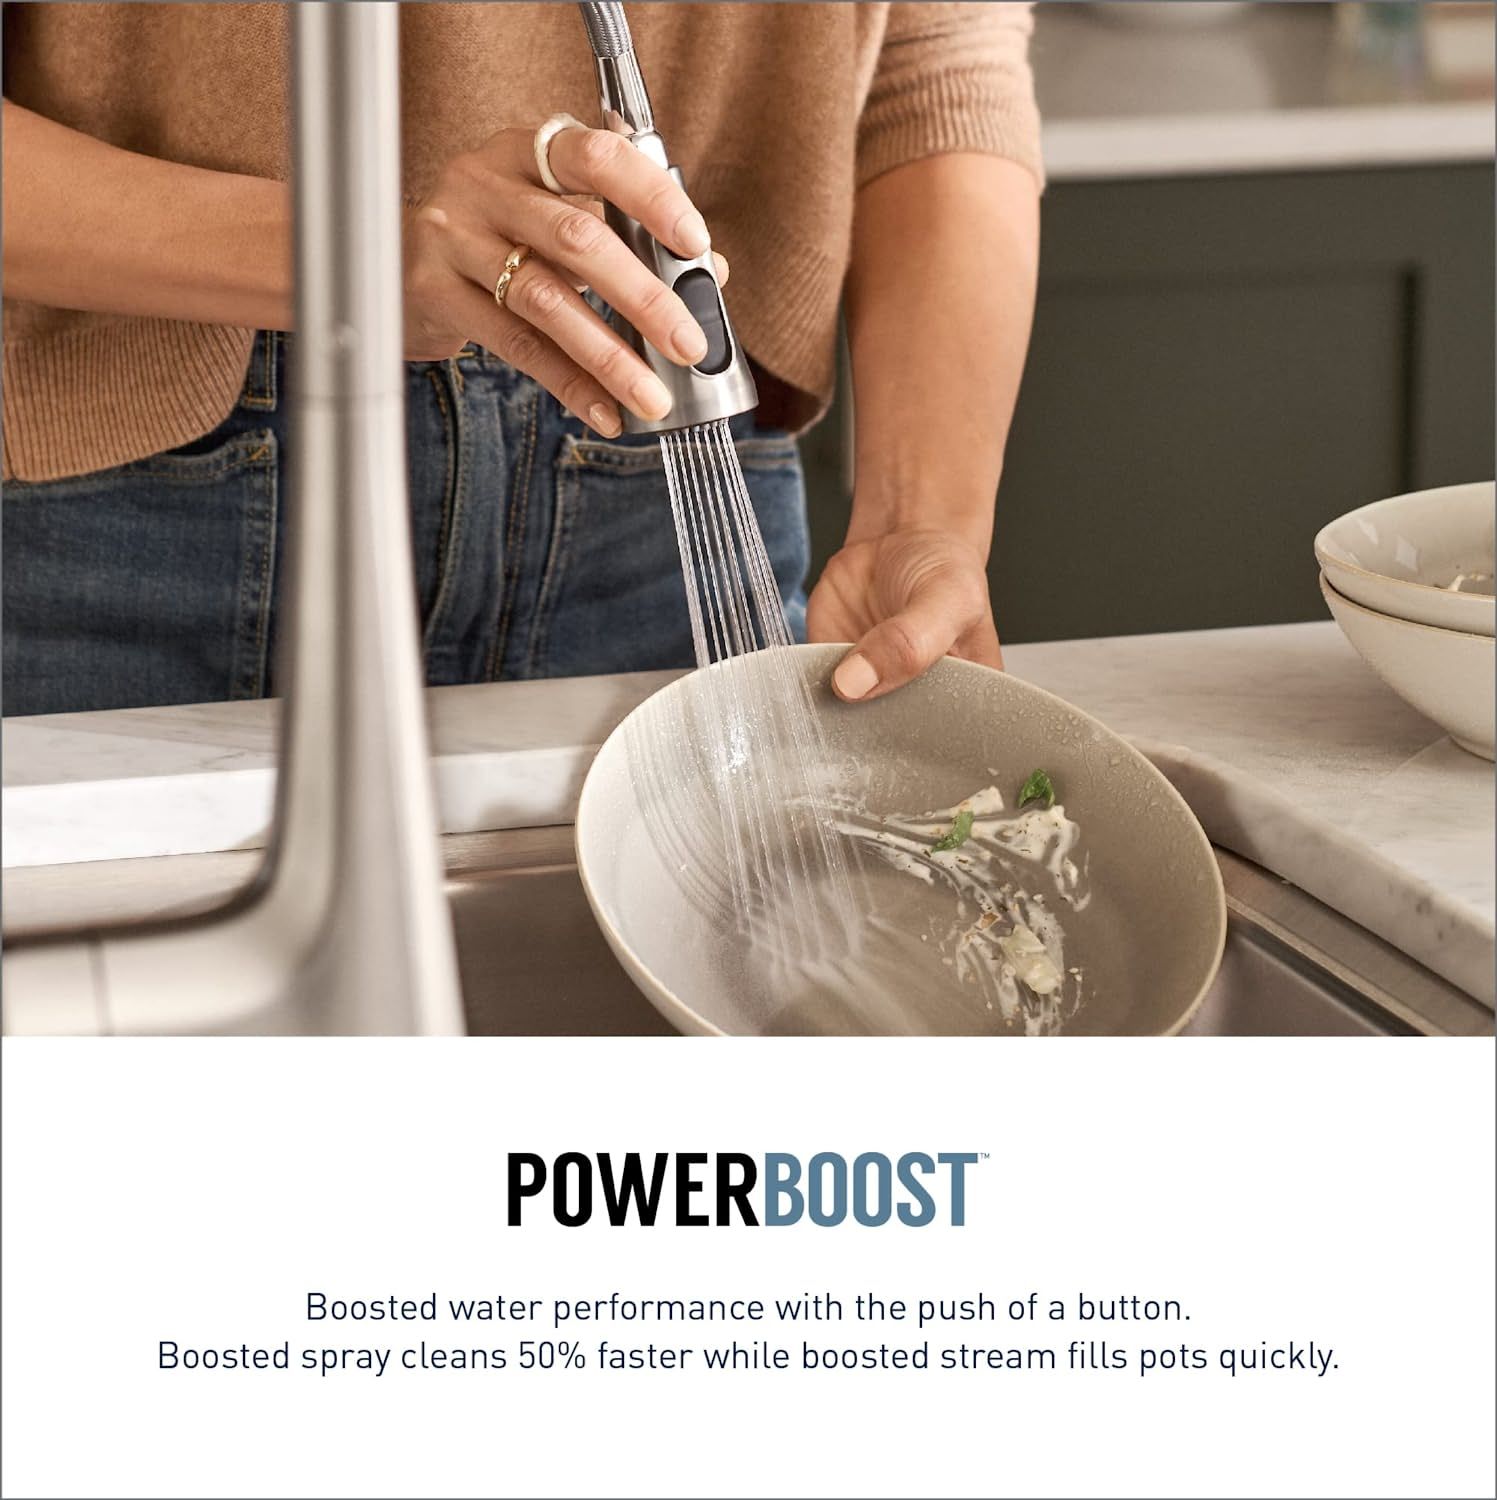 a person washing dishes with the moen sleek smart faucet